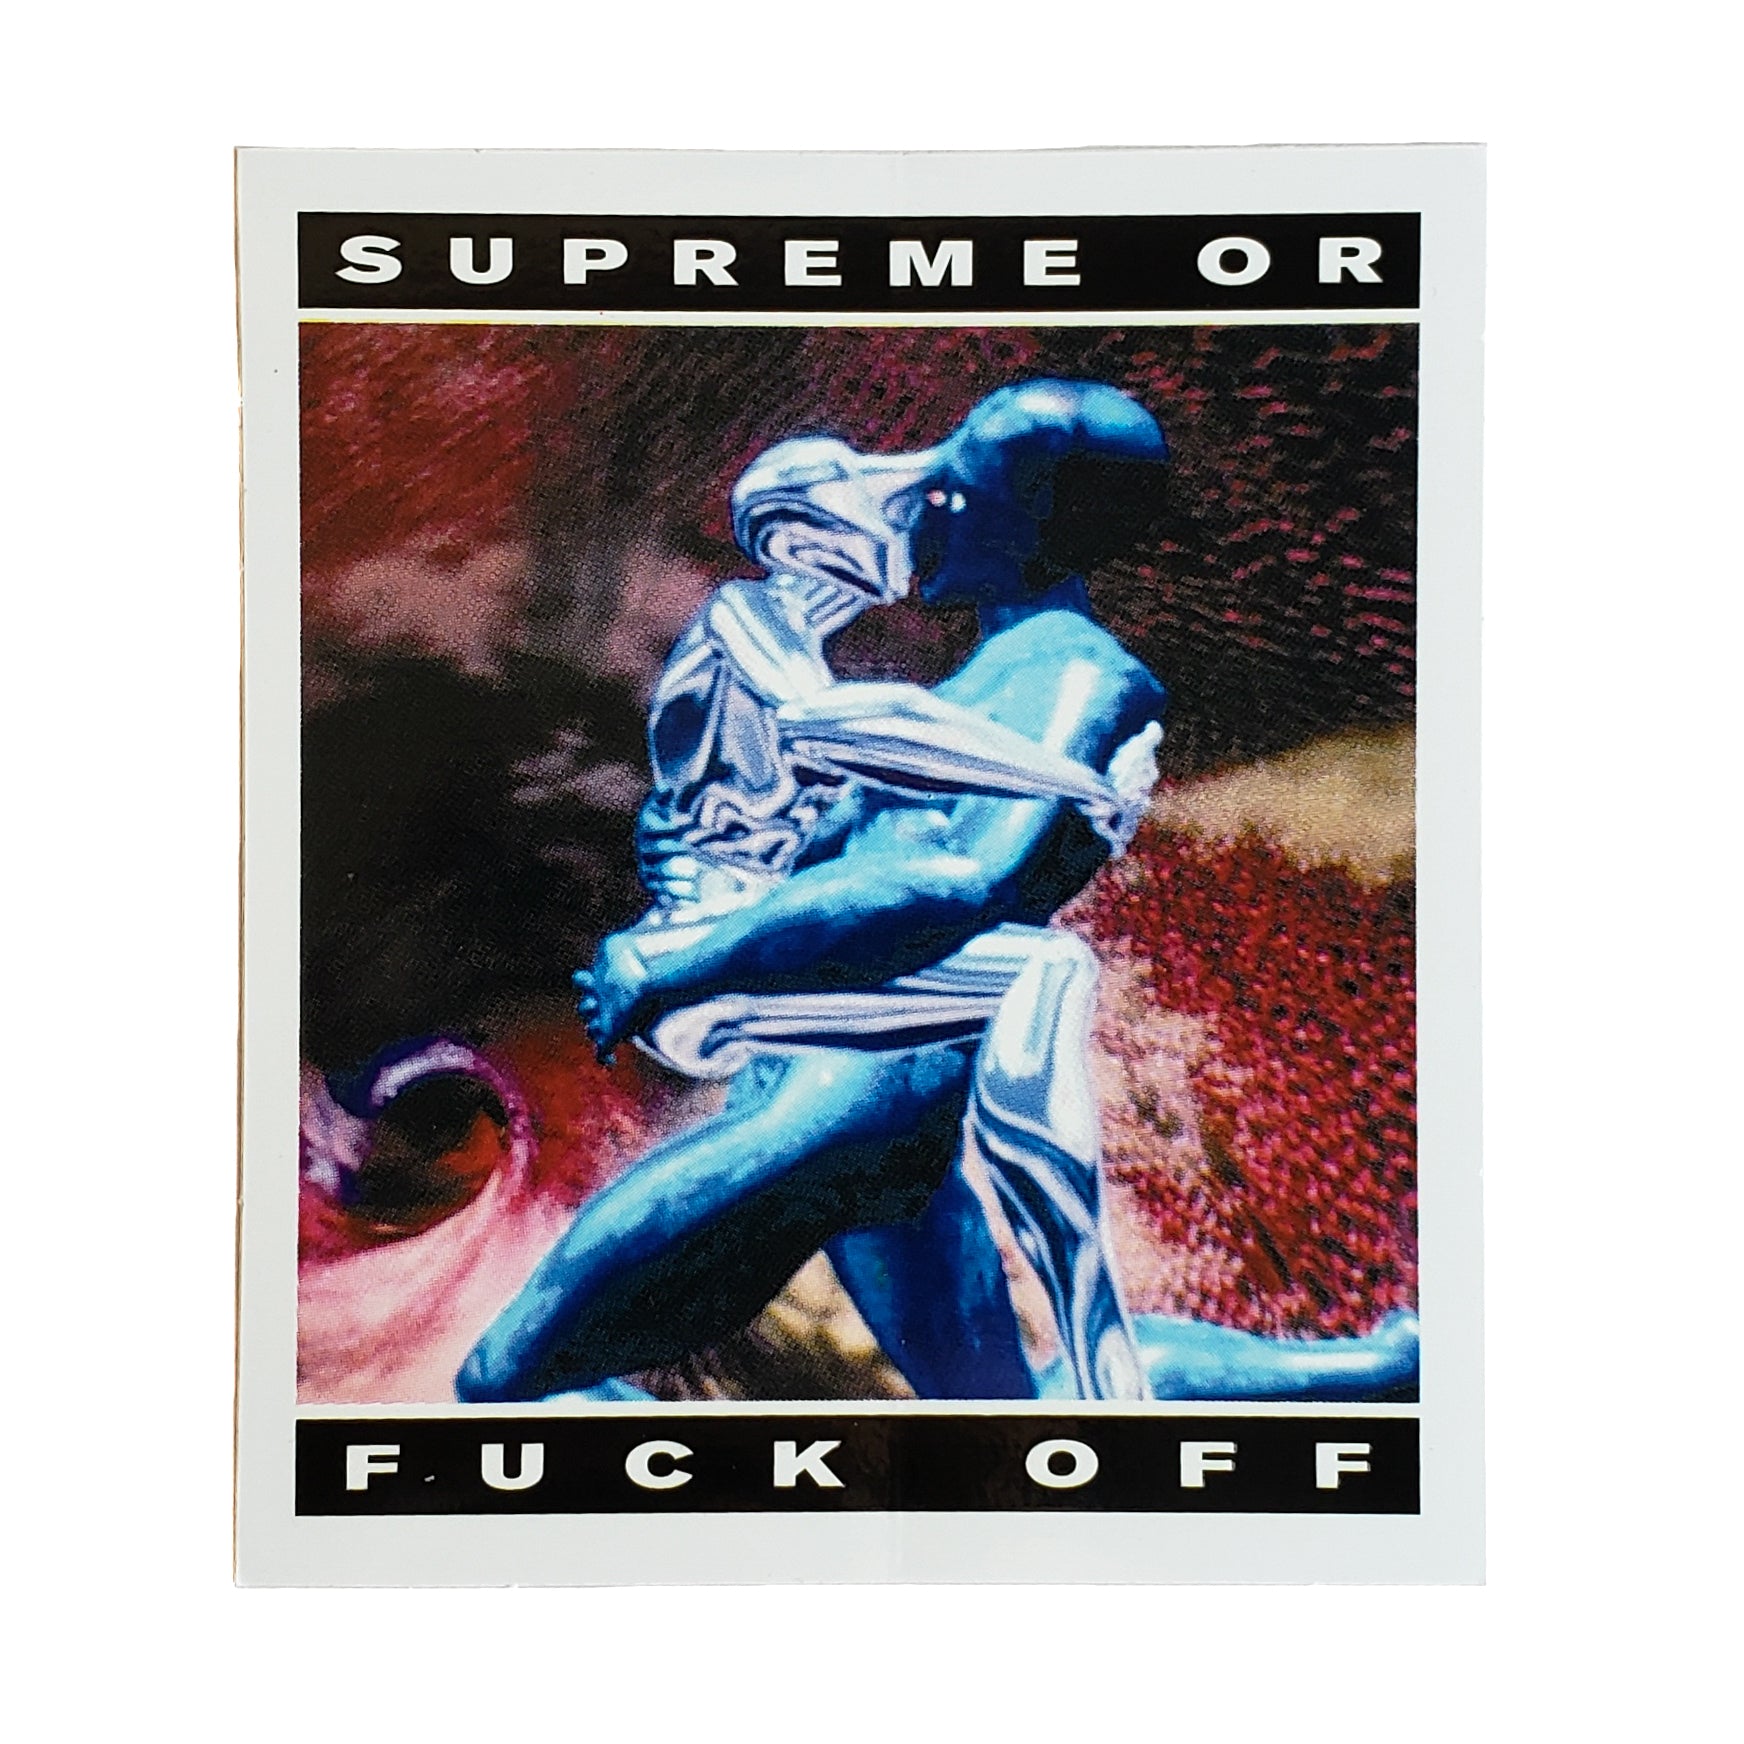 SALE開催中SUPREME JUST SAY FUCK OFF STICKER その他 | isarastrology.org